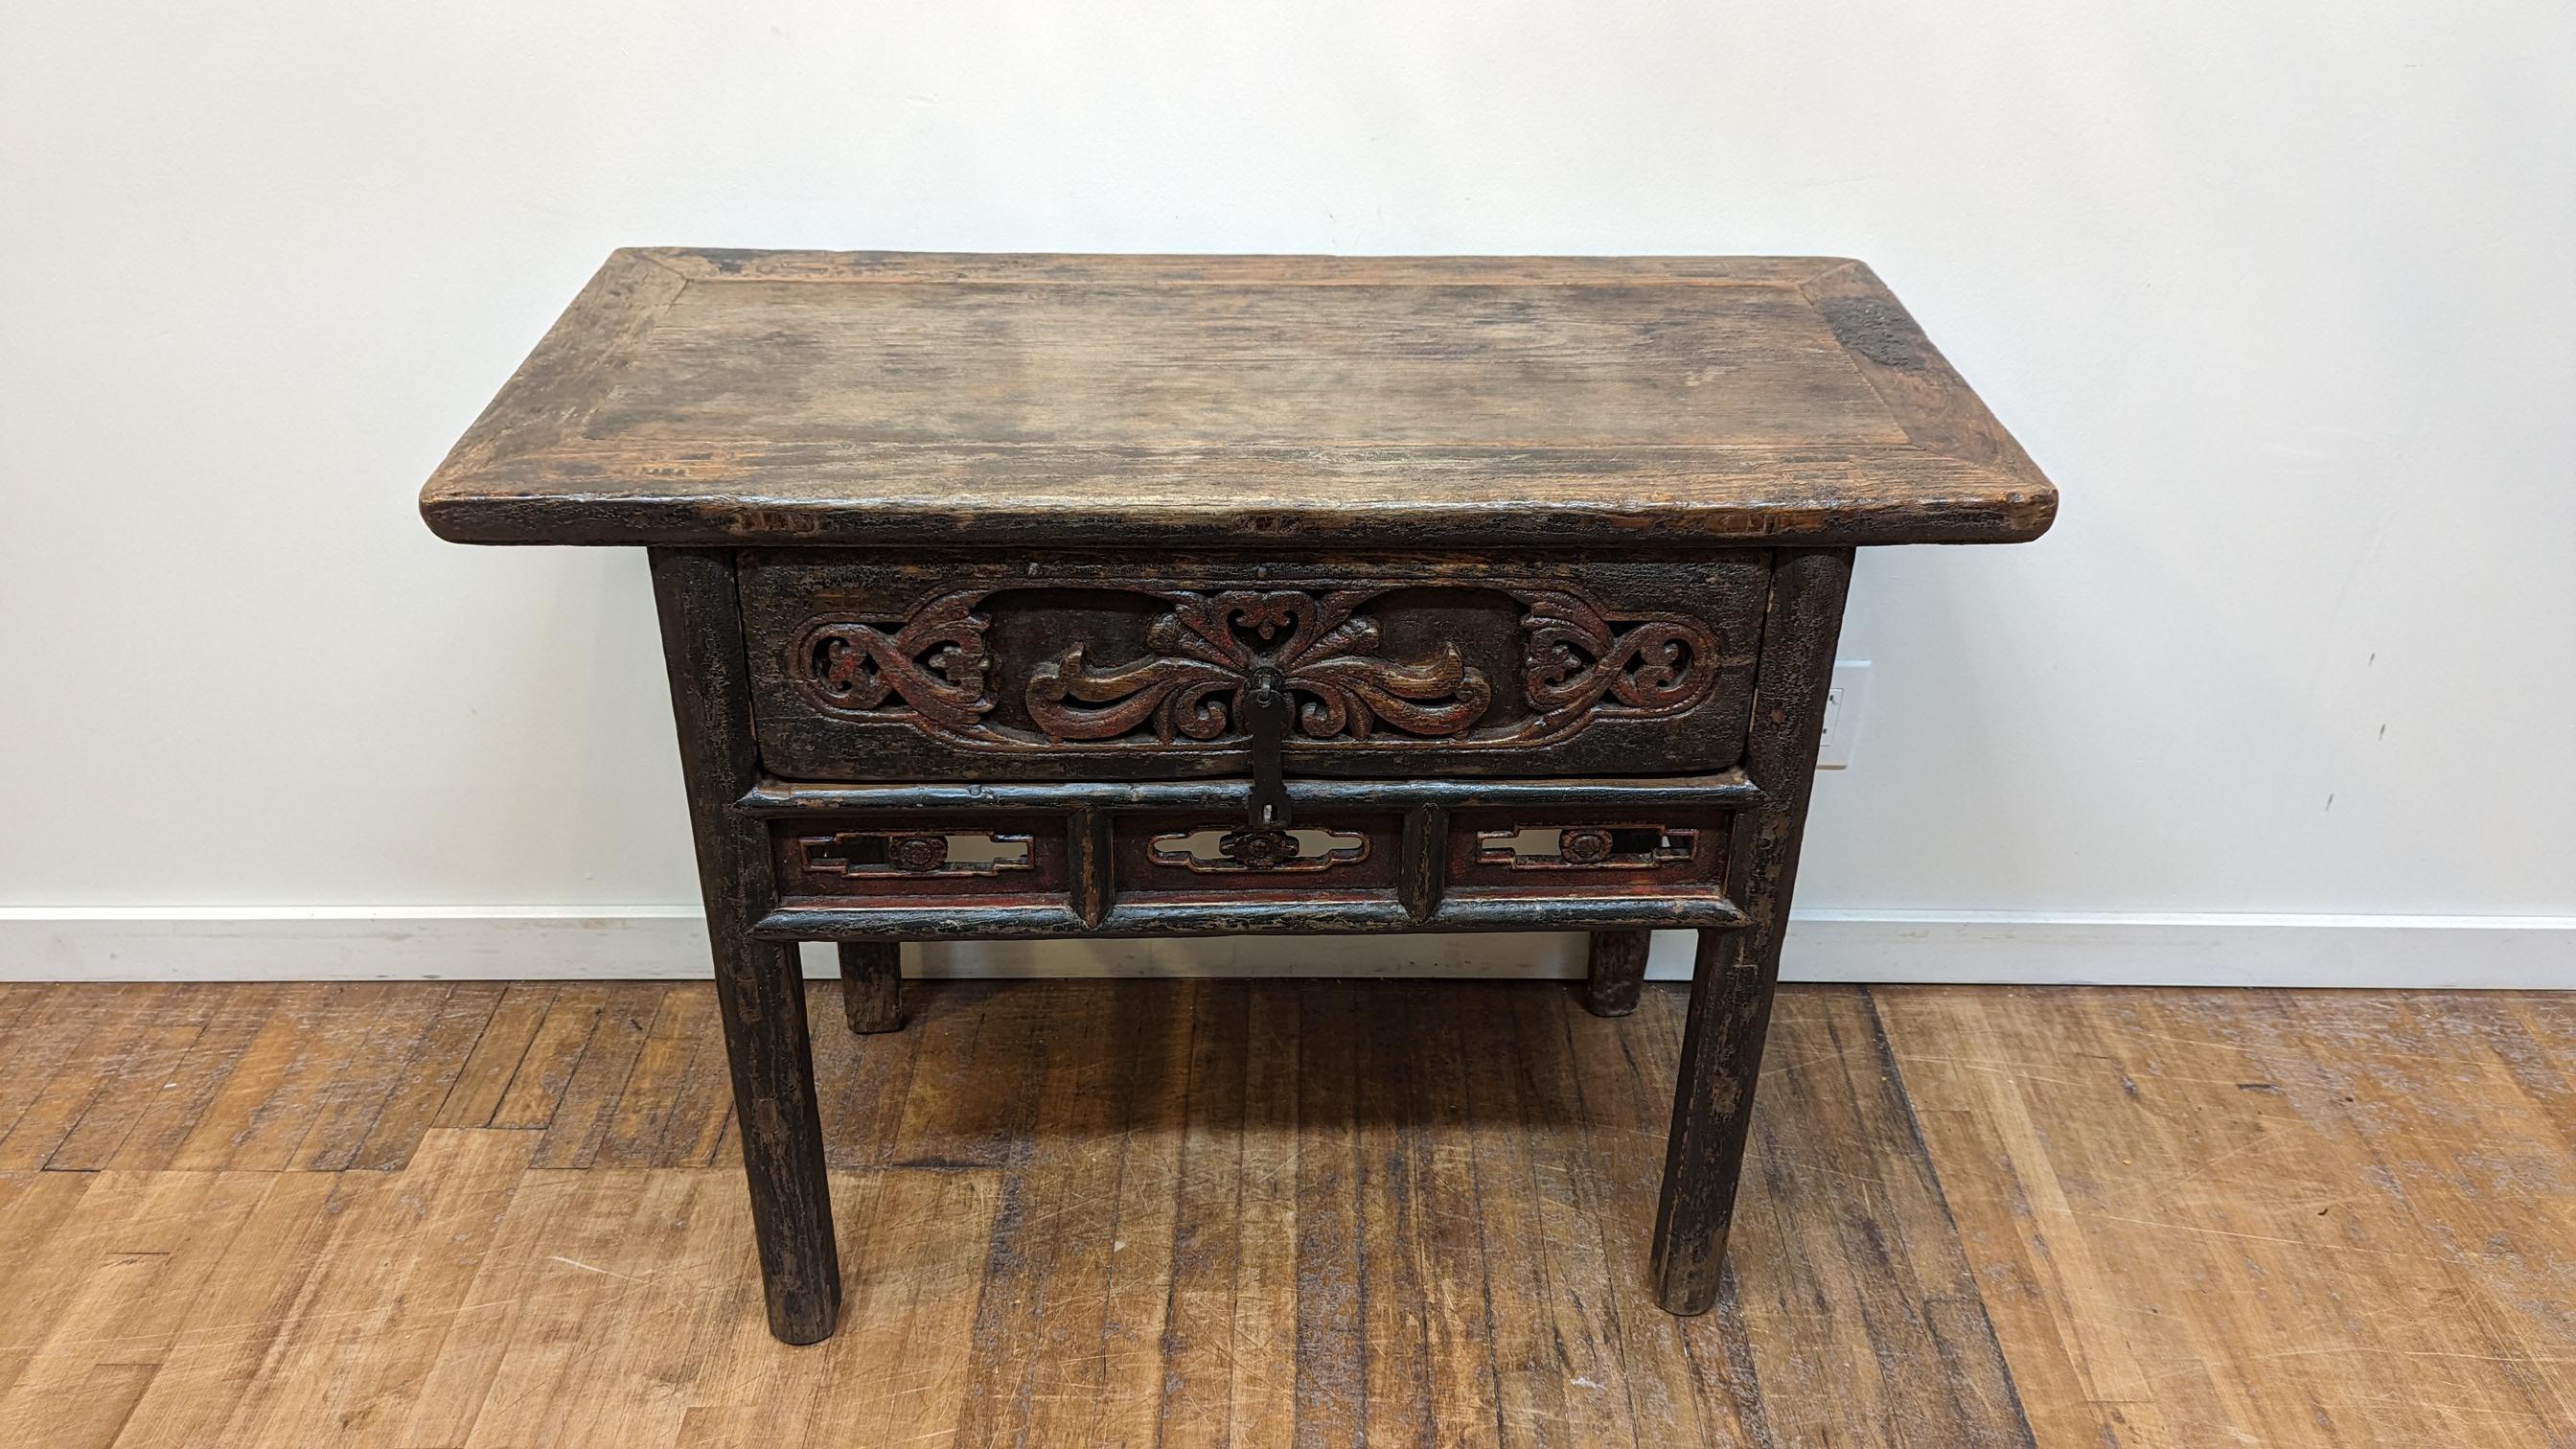 Early 19th century Chinese Console.  Amazing 19th century Console table.  Spectacular patina, rustic with alligatored black and red lacquer remnants to most of the structure.   Wonderful foliate carving to the front drawer plate with intersecting